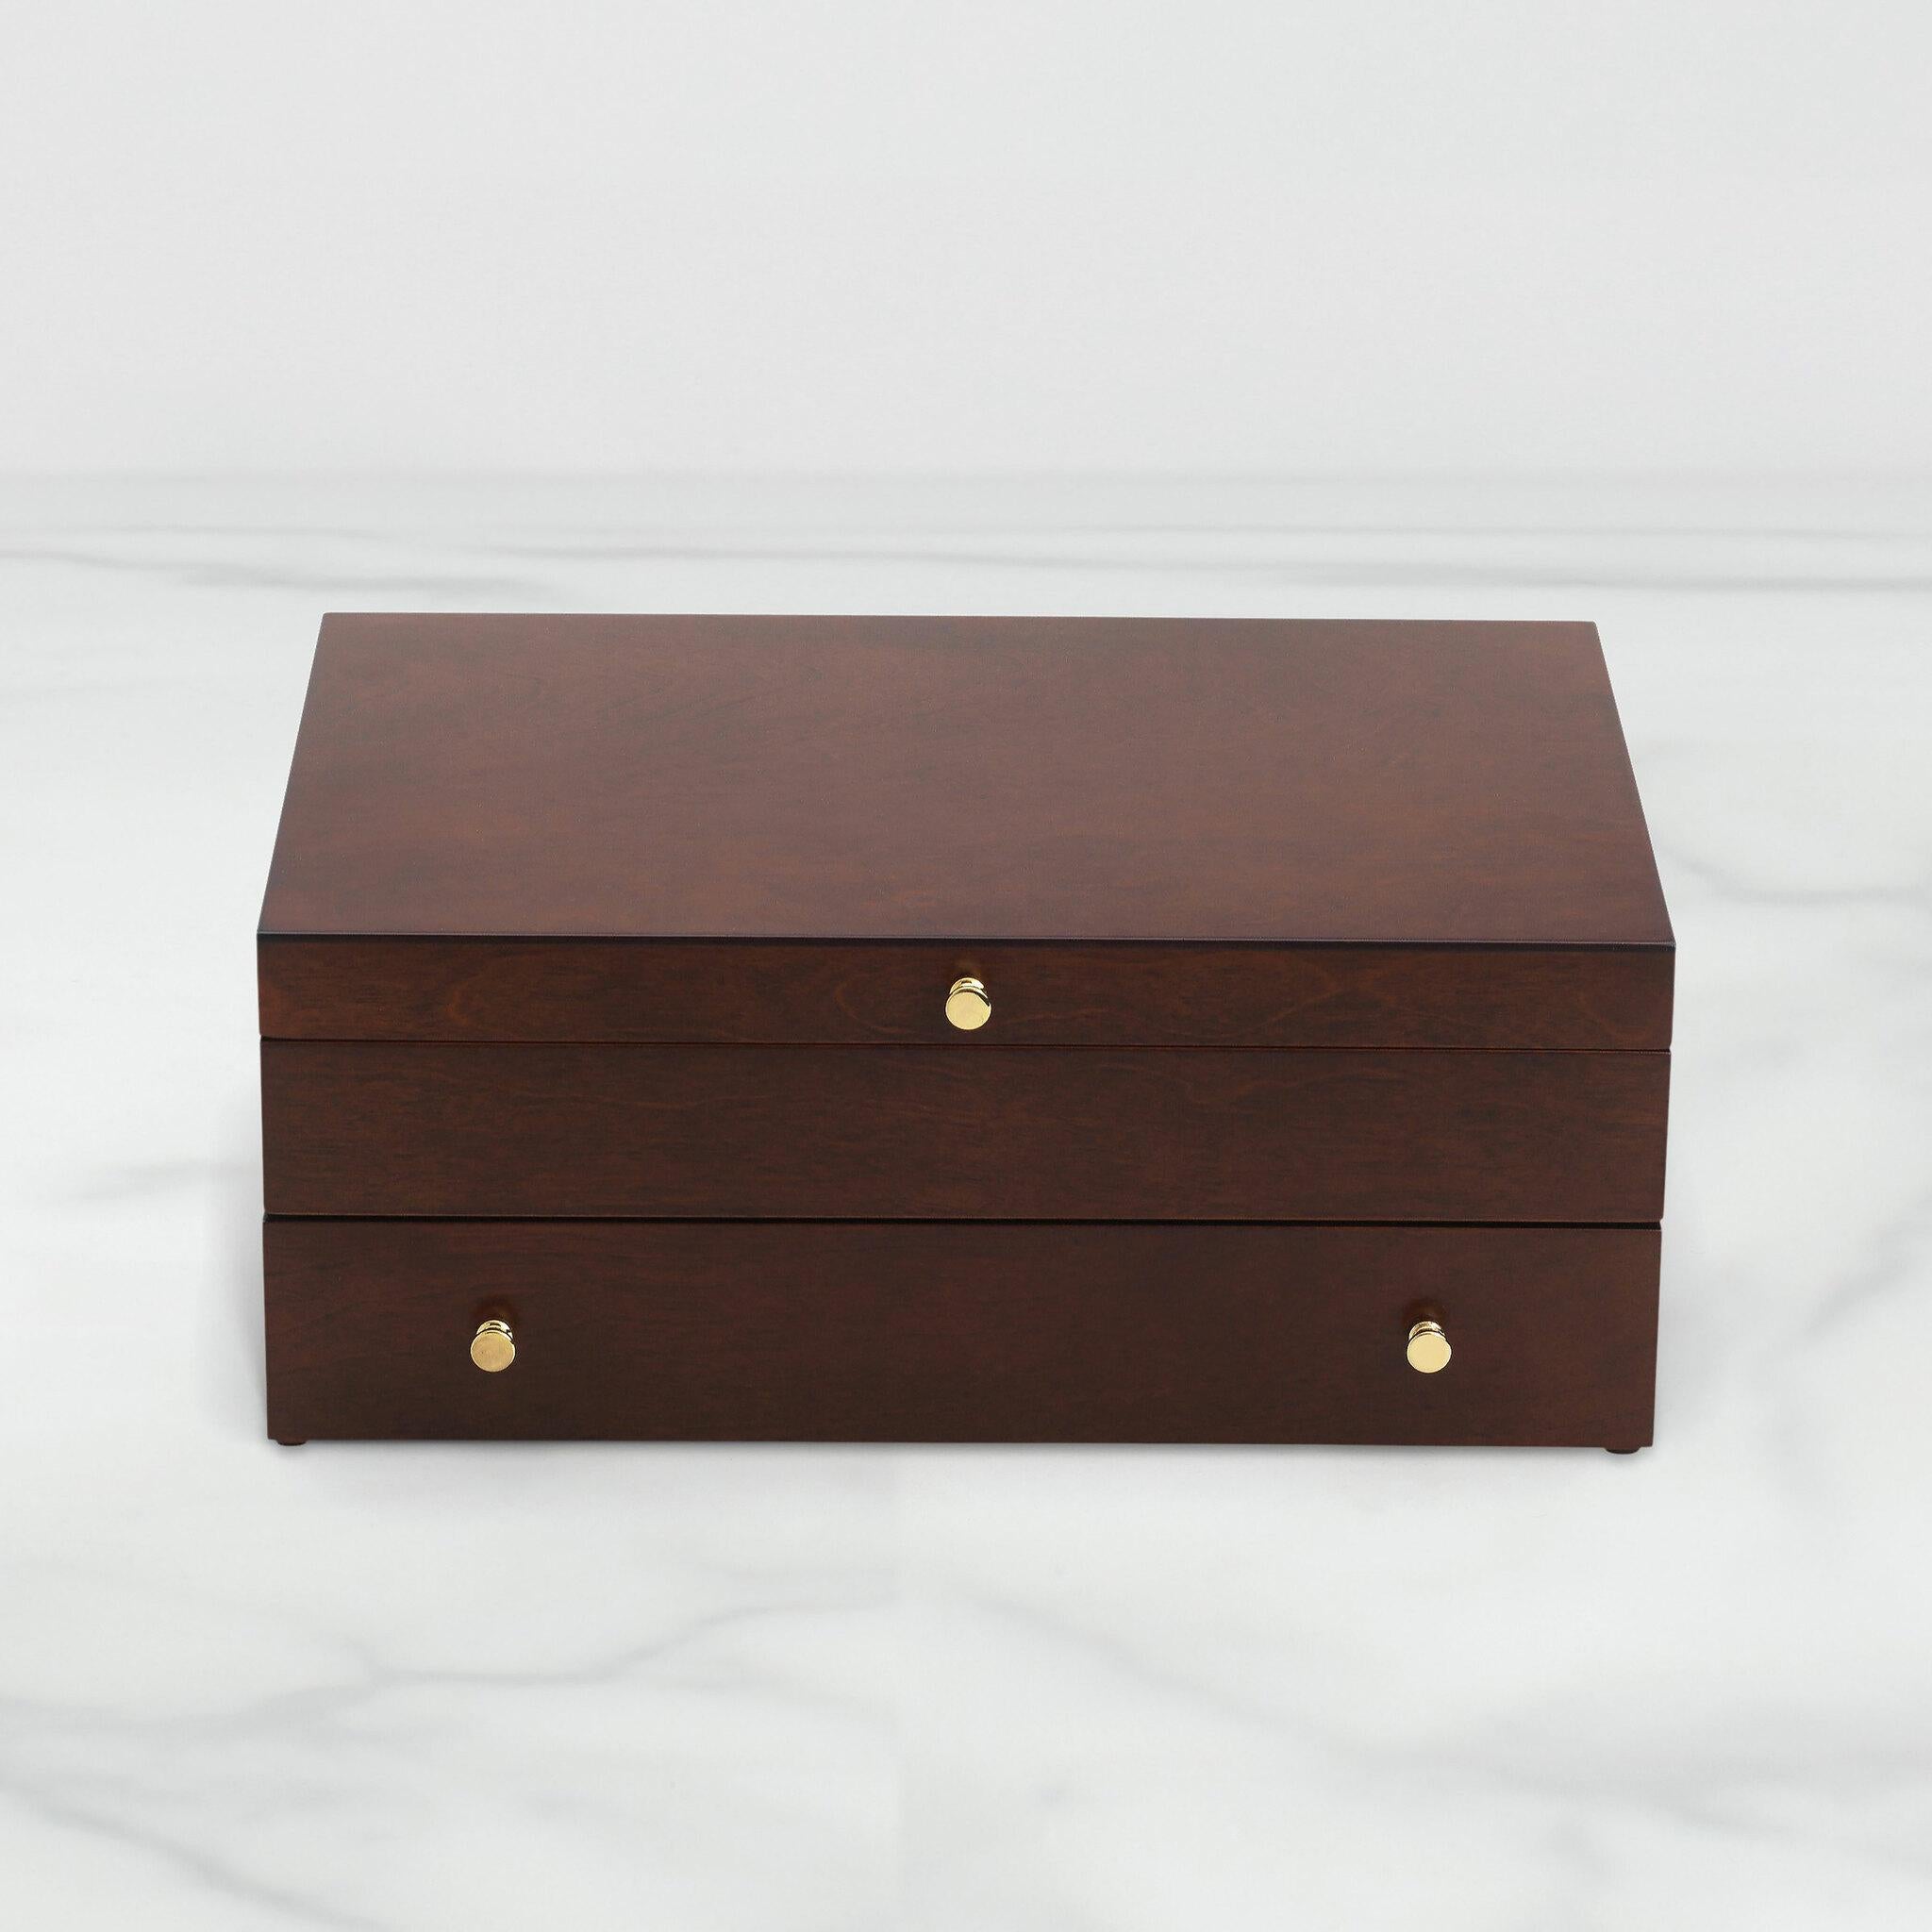 Easily store your favorite utensils with this beautiful flatware chest crafted in smooth mahogany wood. Lift the lid to unveil two sections: a top section to tuck in steak knives and a bottom section that separates out spoons, forks and more. Pull